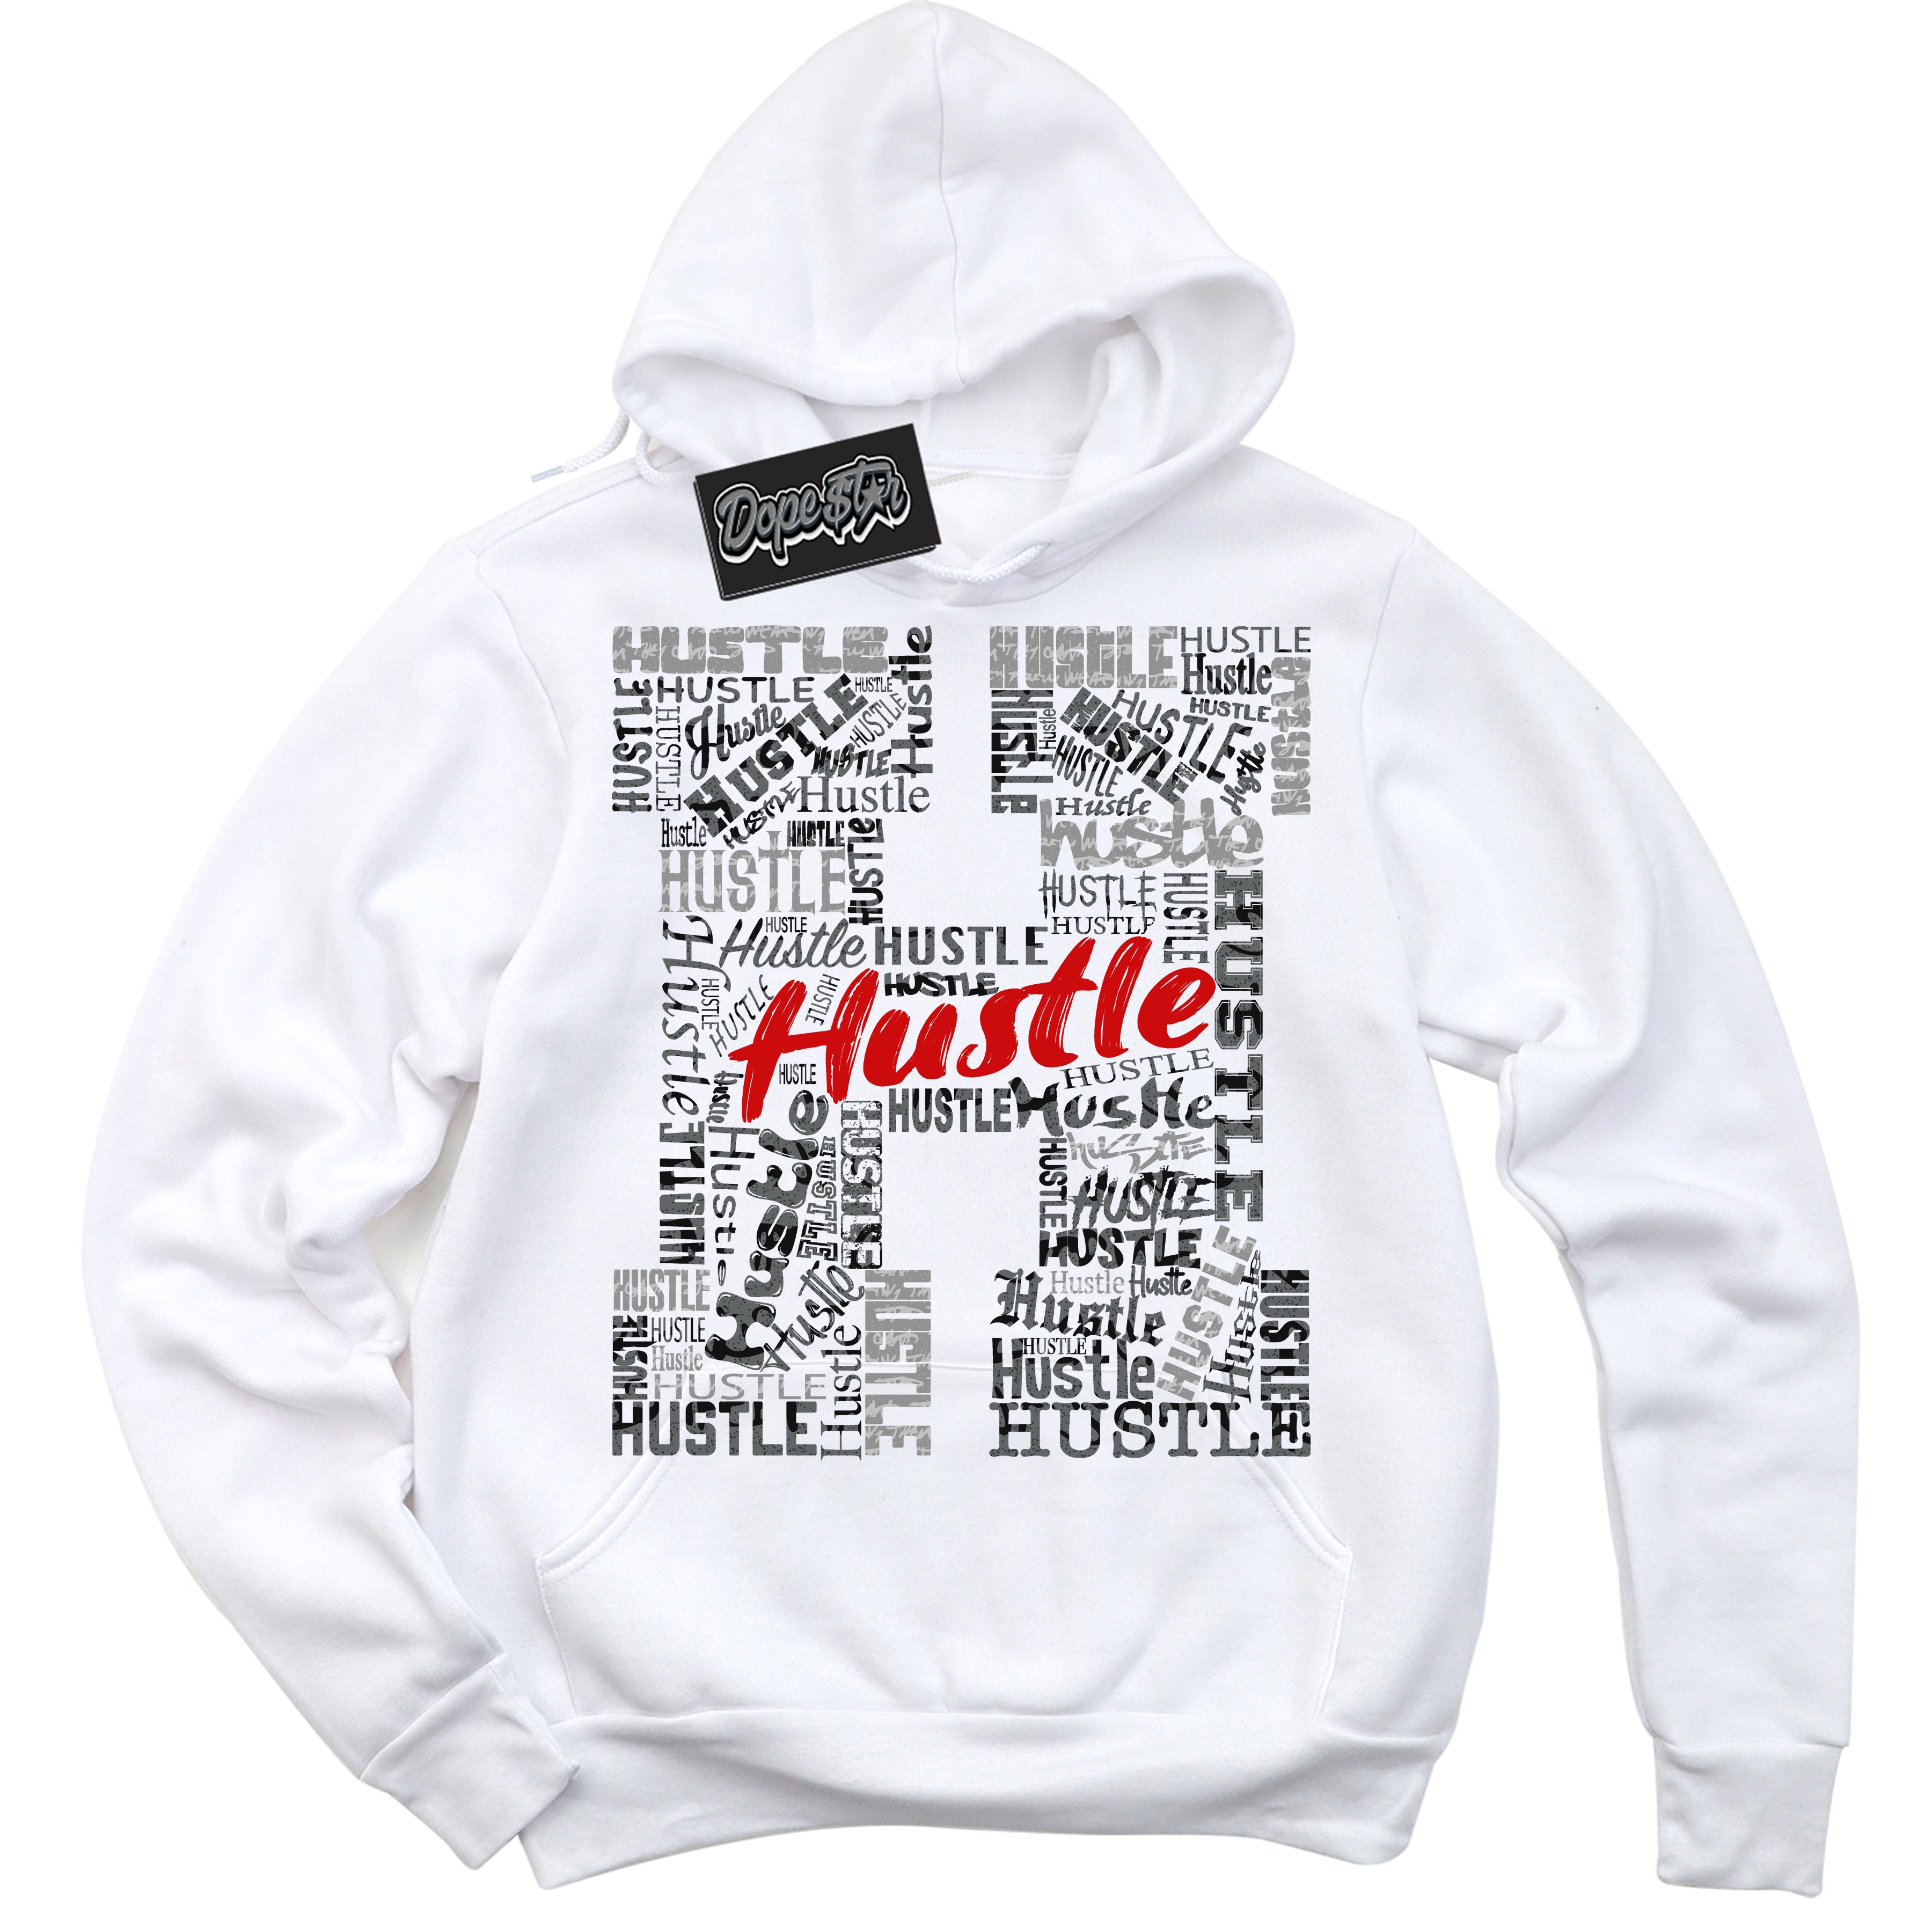 Cool White Hoodie with “ Hustle H ”  design that Perfectly Matches Rebellionaire 1s Sneakers.